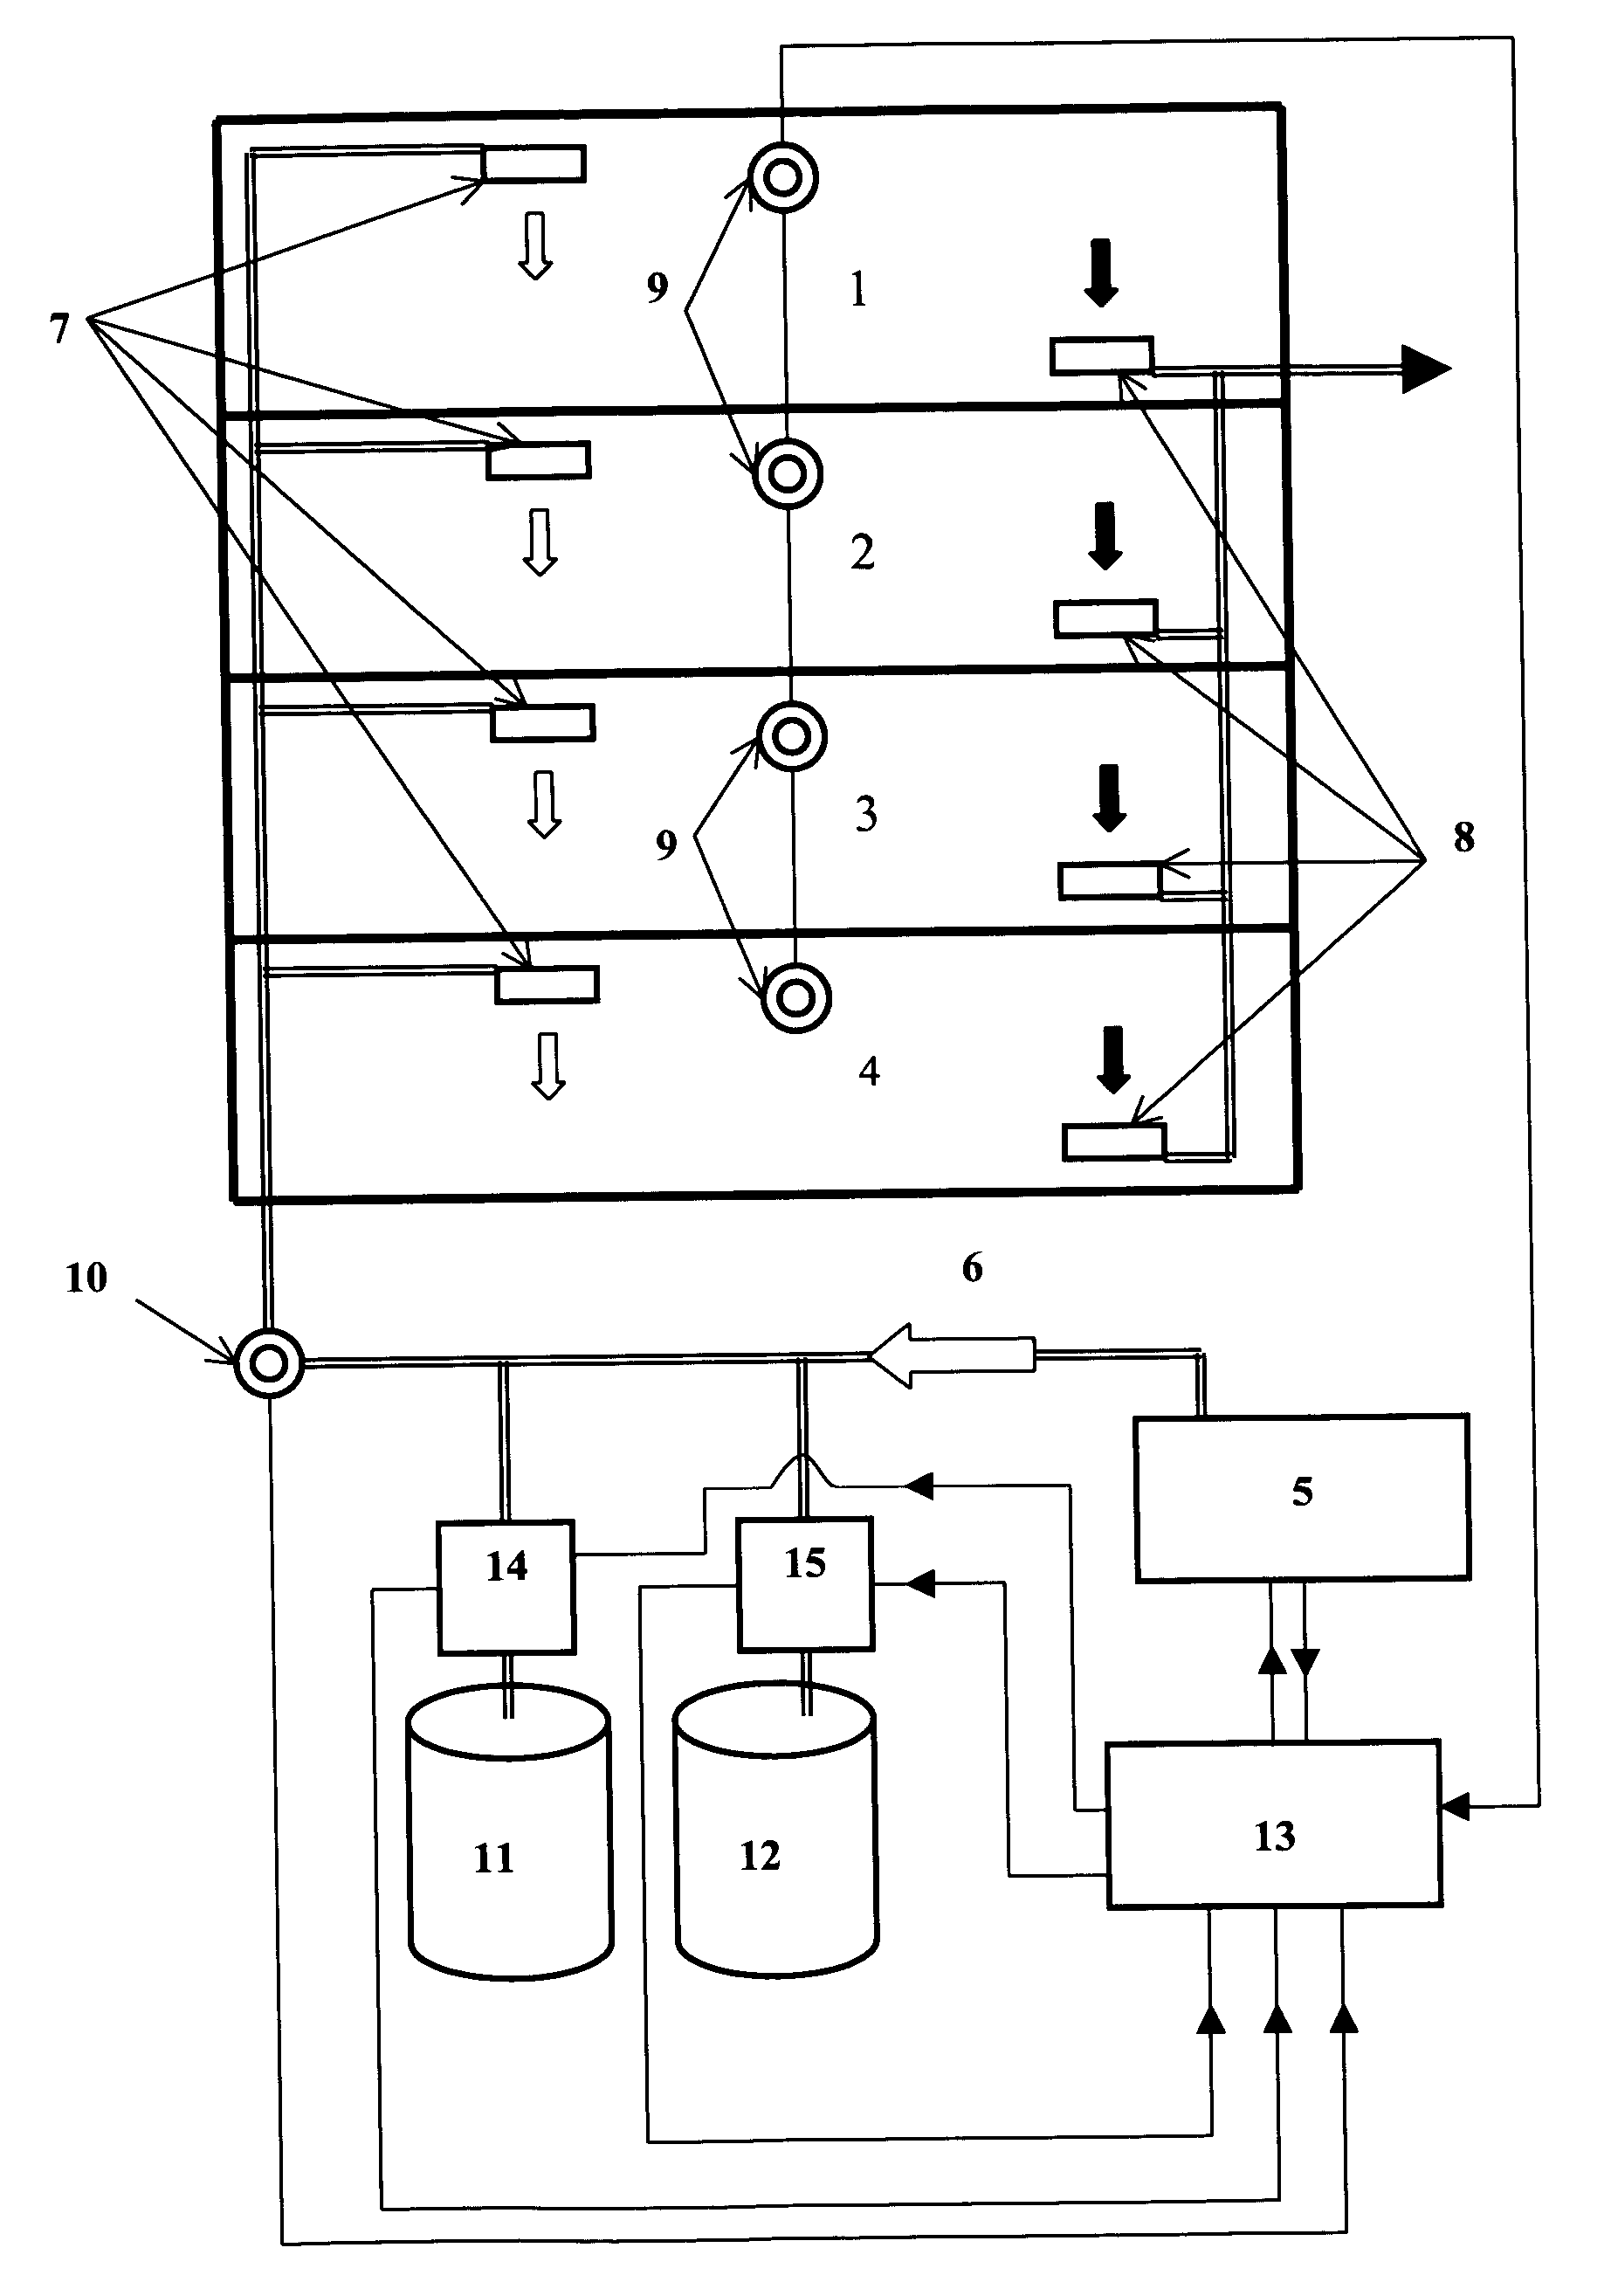 Method and apparatus for air conditioning